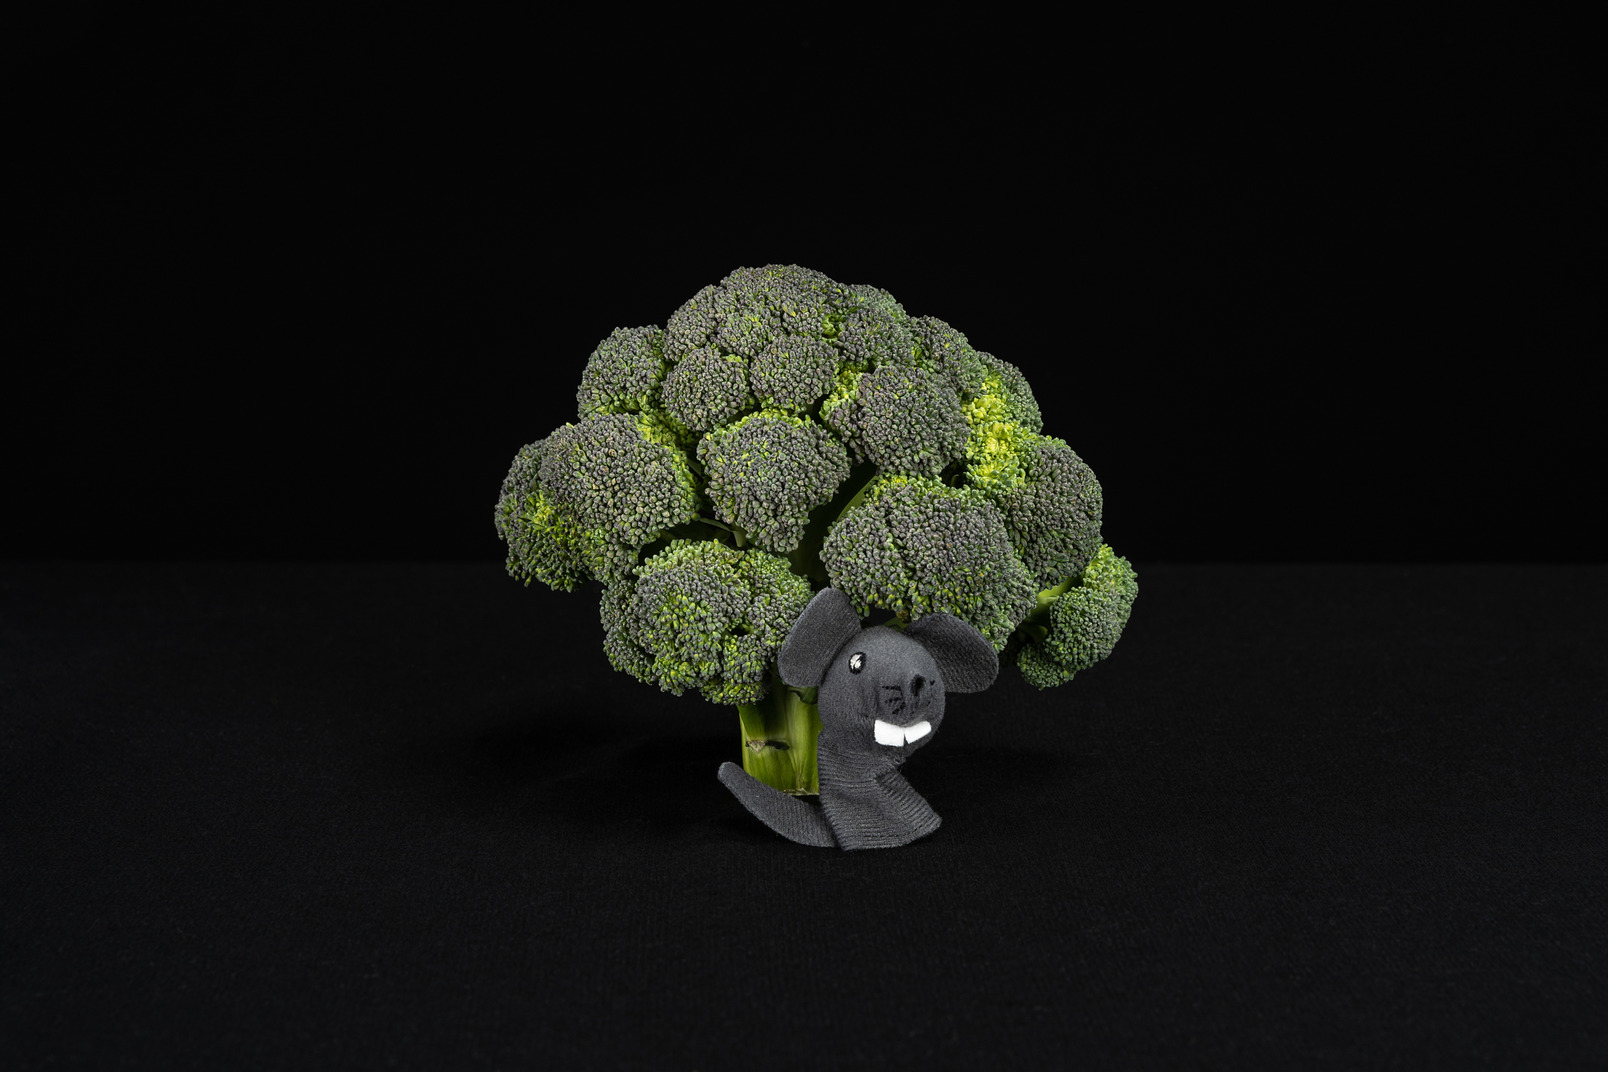 Broccoli and toy mouse on black background